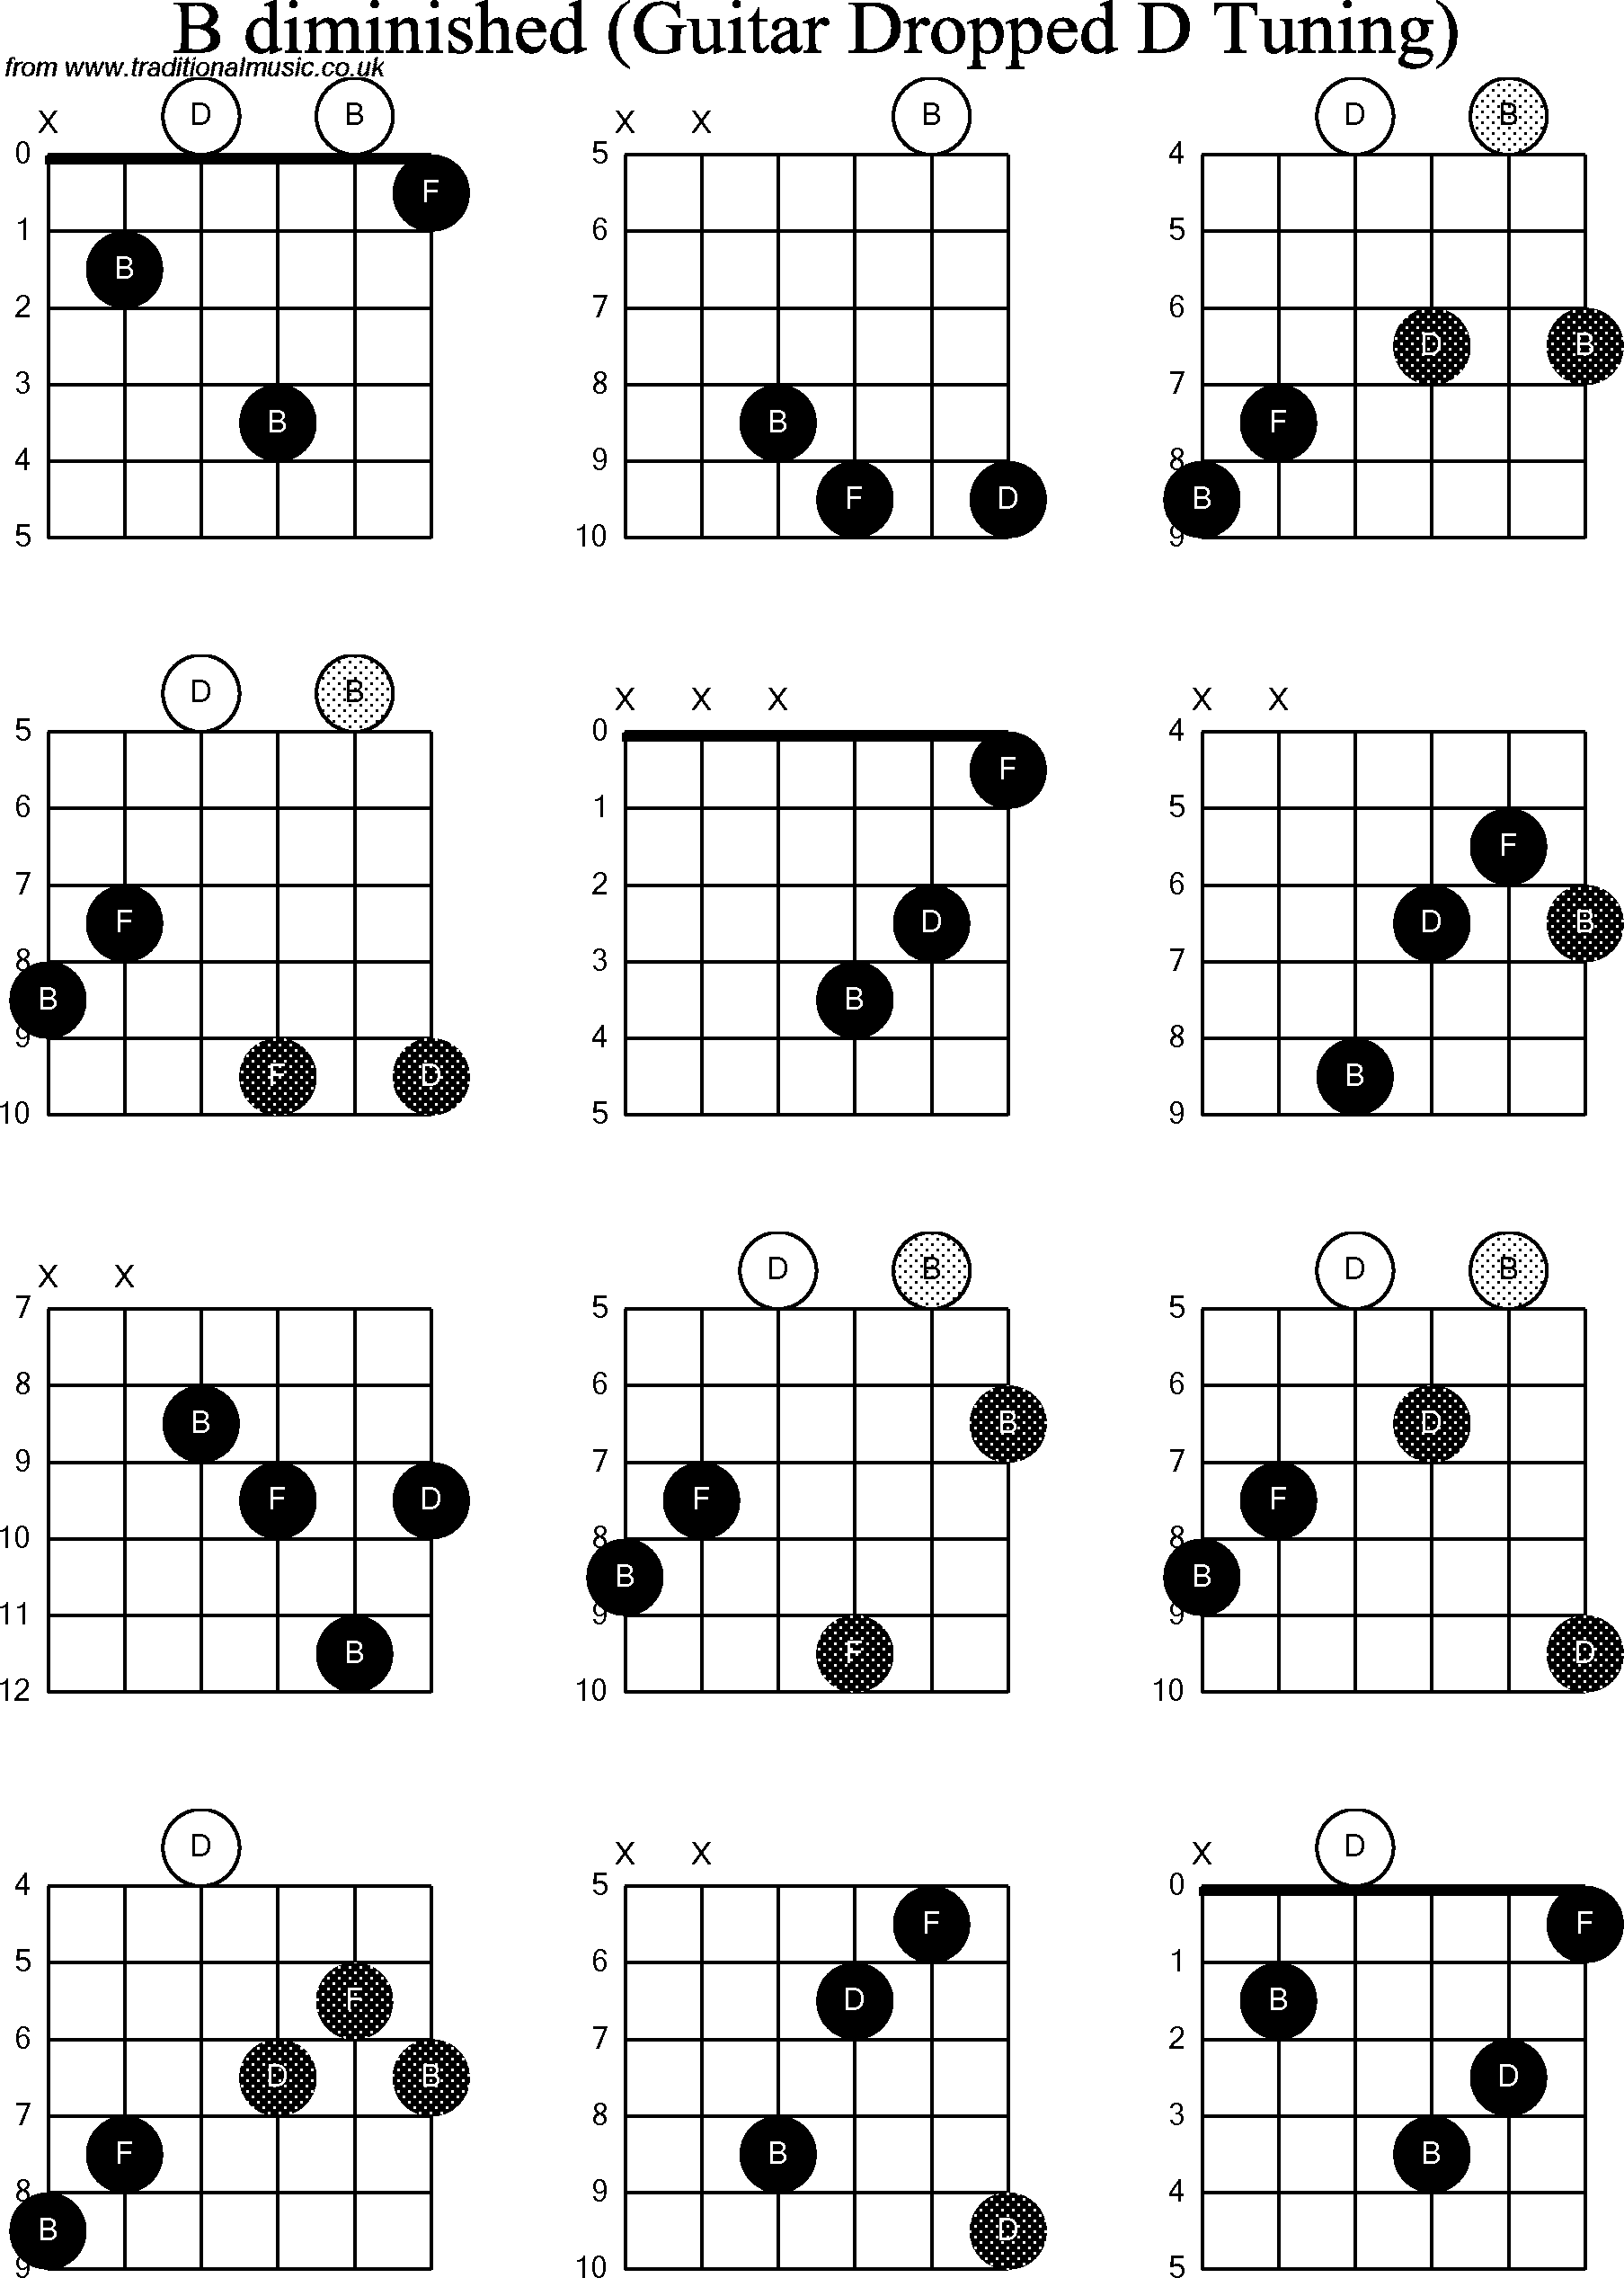 Guitar Chord Chart B Ukchord diagrams for dropped d